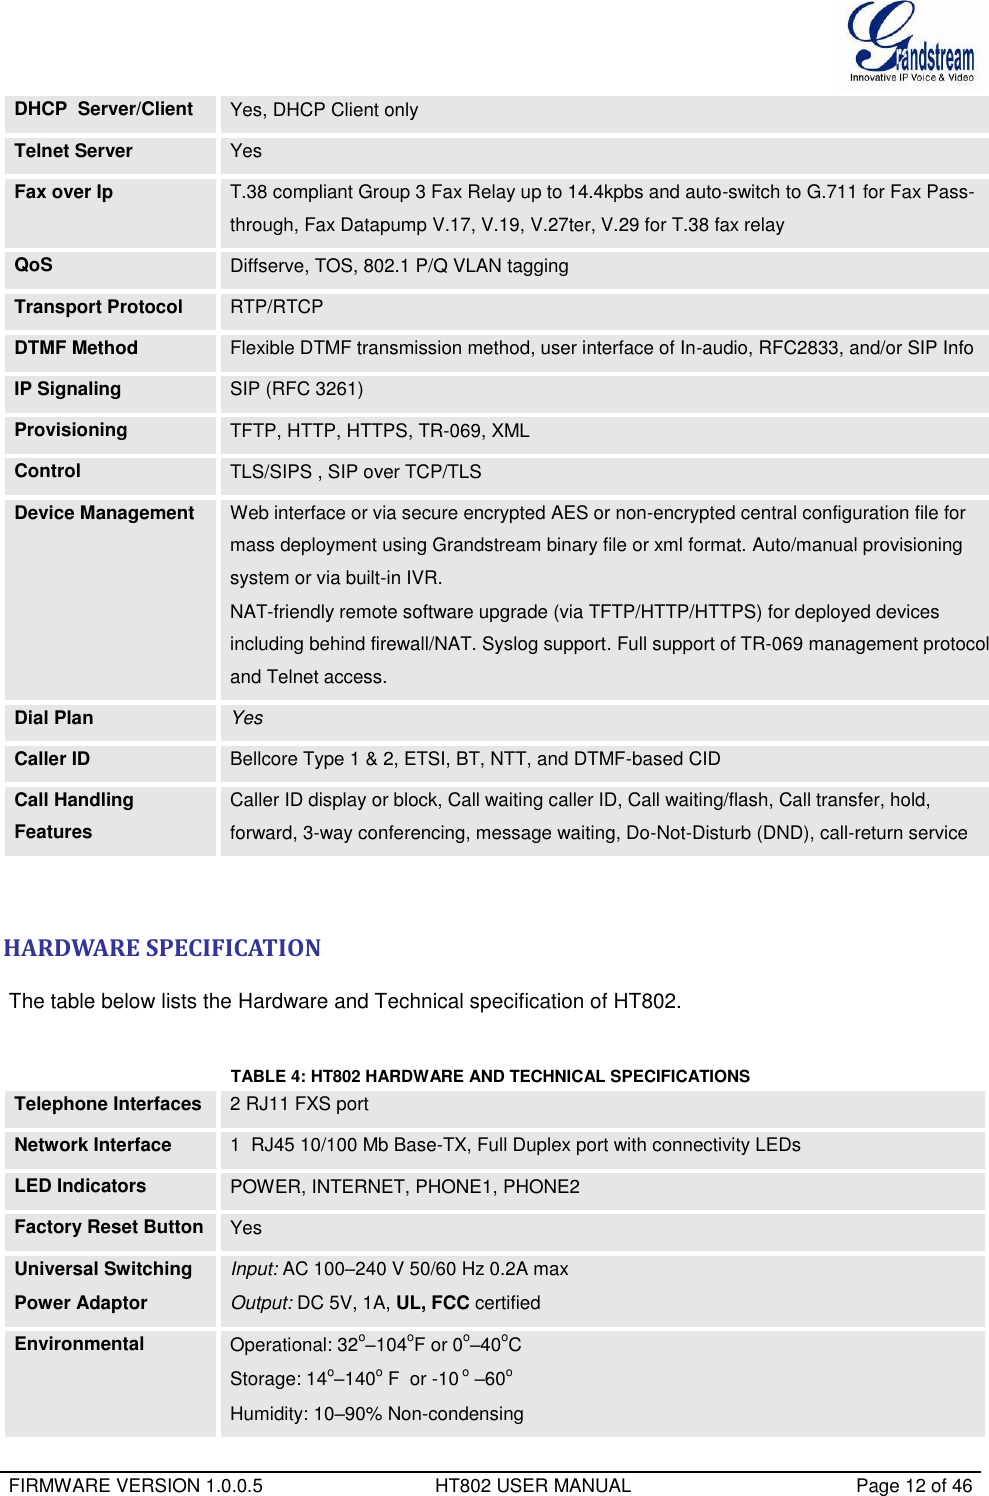  FIRMWARE VERSION 1.0.0.5                                 HT802 USER MANUAL                                           Page 12 of 46  DHCP  Server/Client Yes, DHCP Client only Telnet Server Yes Fax over Ip T.38 compliant Group 3 Fax Relay up to 14.4kpbs and auto-switch to G.711 for Fax Pass-through, Fax Datapump V.17, V.19, V.27ter, V.29 for T.38 fax relay QoS Diffserve, TOS, 802.1 P/Q VLAN tagging Transport Protocol RTP/RTCP DTMF Method Flexible DTMF transmission method, user interface of In-audio, RFC2833, and/or SIP Info IP Signaling SIP (RFC 3261) Provisioning TFTP, HTTP, HTTPS, TR-069, XML Control TLS/SIPS , SIP over TCP/TLS Device Management Web interface or via secure encrypted AES or non-encrypted central configuration file for mass deployment using Grandstream binary file or xml format. Auto/manual provisioning system or via built-in IVR. NAT-friendly remote software upgrade (via TFTP/HTTP/HTTPS) for deployed devices including behind firewall/NAT. Syslog support. Full support of TR-069 management protocol and Telnet access. Dial Plan Yes Caller ID Bellcore Type 1 &amp; 2, ETSI, BT, NTT, and DTMF-based CID Call Handling Features Caller ID display or block, Call waiting caller ID, Call waiting/flash, Call transfer, hold, forward, 3-way conferencing, message waiting, Do-Not-Disturb (DND), call-return service   HARDWARE SPECIFICATION  The table below lists the Hardware and Technical specification of HT802.   TABLE 4: HT802 HARDWARE AND TECHNICAL SPECIFICATIONS Telephone Interfaces 2 RJ11 FXS port Network Interface 1  RJ45 10/100 Mb Base-TX, Full Duplex port with connectivity LEDs LED Indicators POWER, INTERNET, PHONE1, PHONE2 Factory Reset Button Yes Universal Switching Power Adaptor Input: AC 100–240 V 50/60 Hz 0.2A max Output: DC 5V, 1A, UL, FCC certified Environmental Operational: 32o–104oF or 0o–40oC Storage: 14o–140o F  or -10 o –60o Humidity: 10–90% Non-condensing 